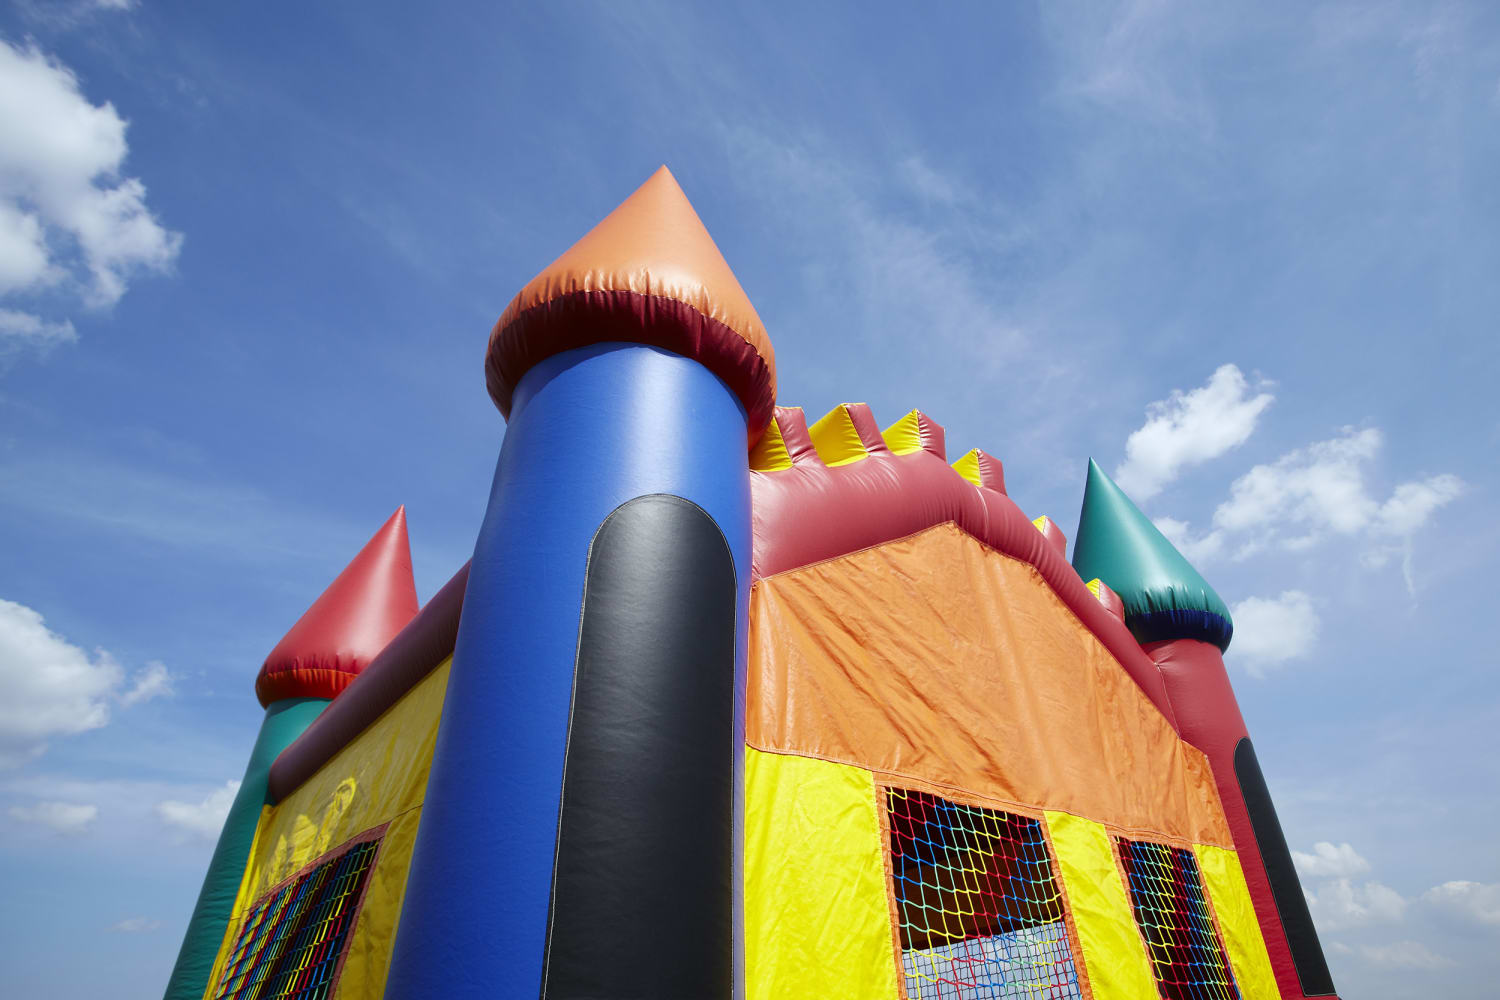 How Do I Find A Castle Inflatable Bounce House W Slide Service? thumbnail